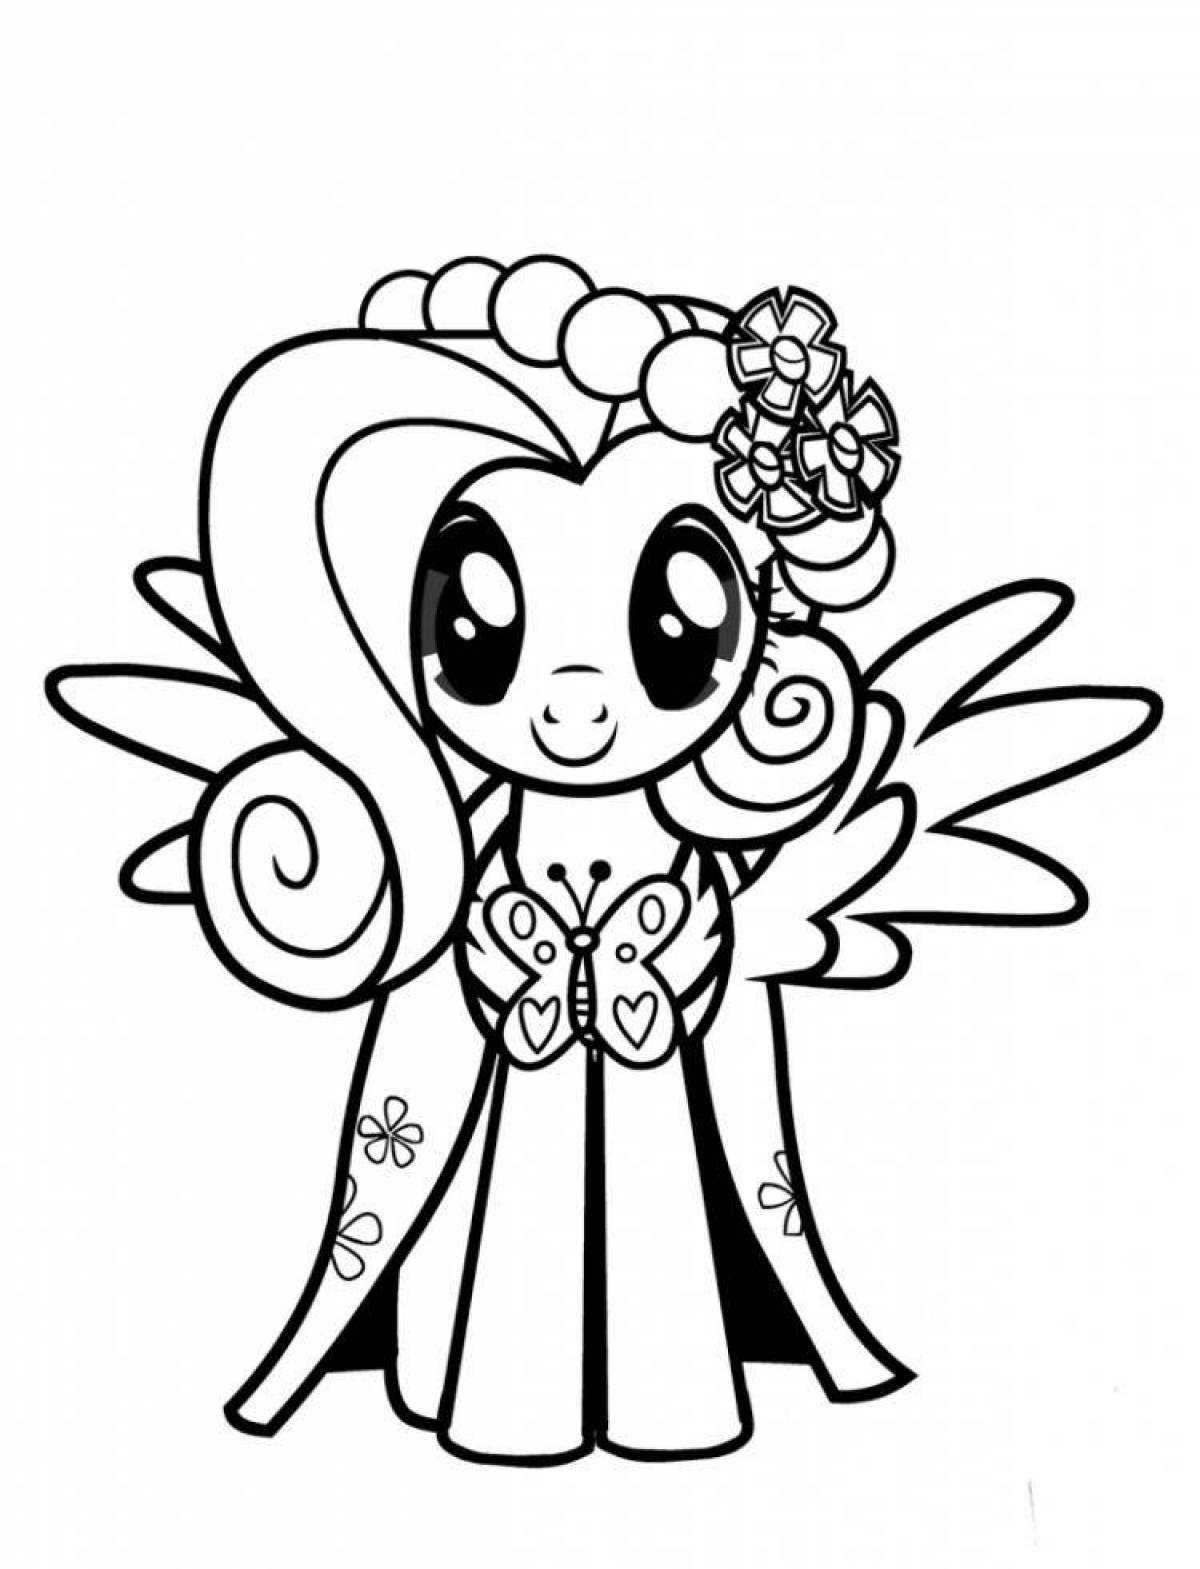 Exquisite fluttershy pony coloring book